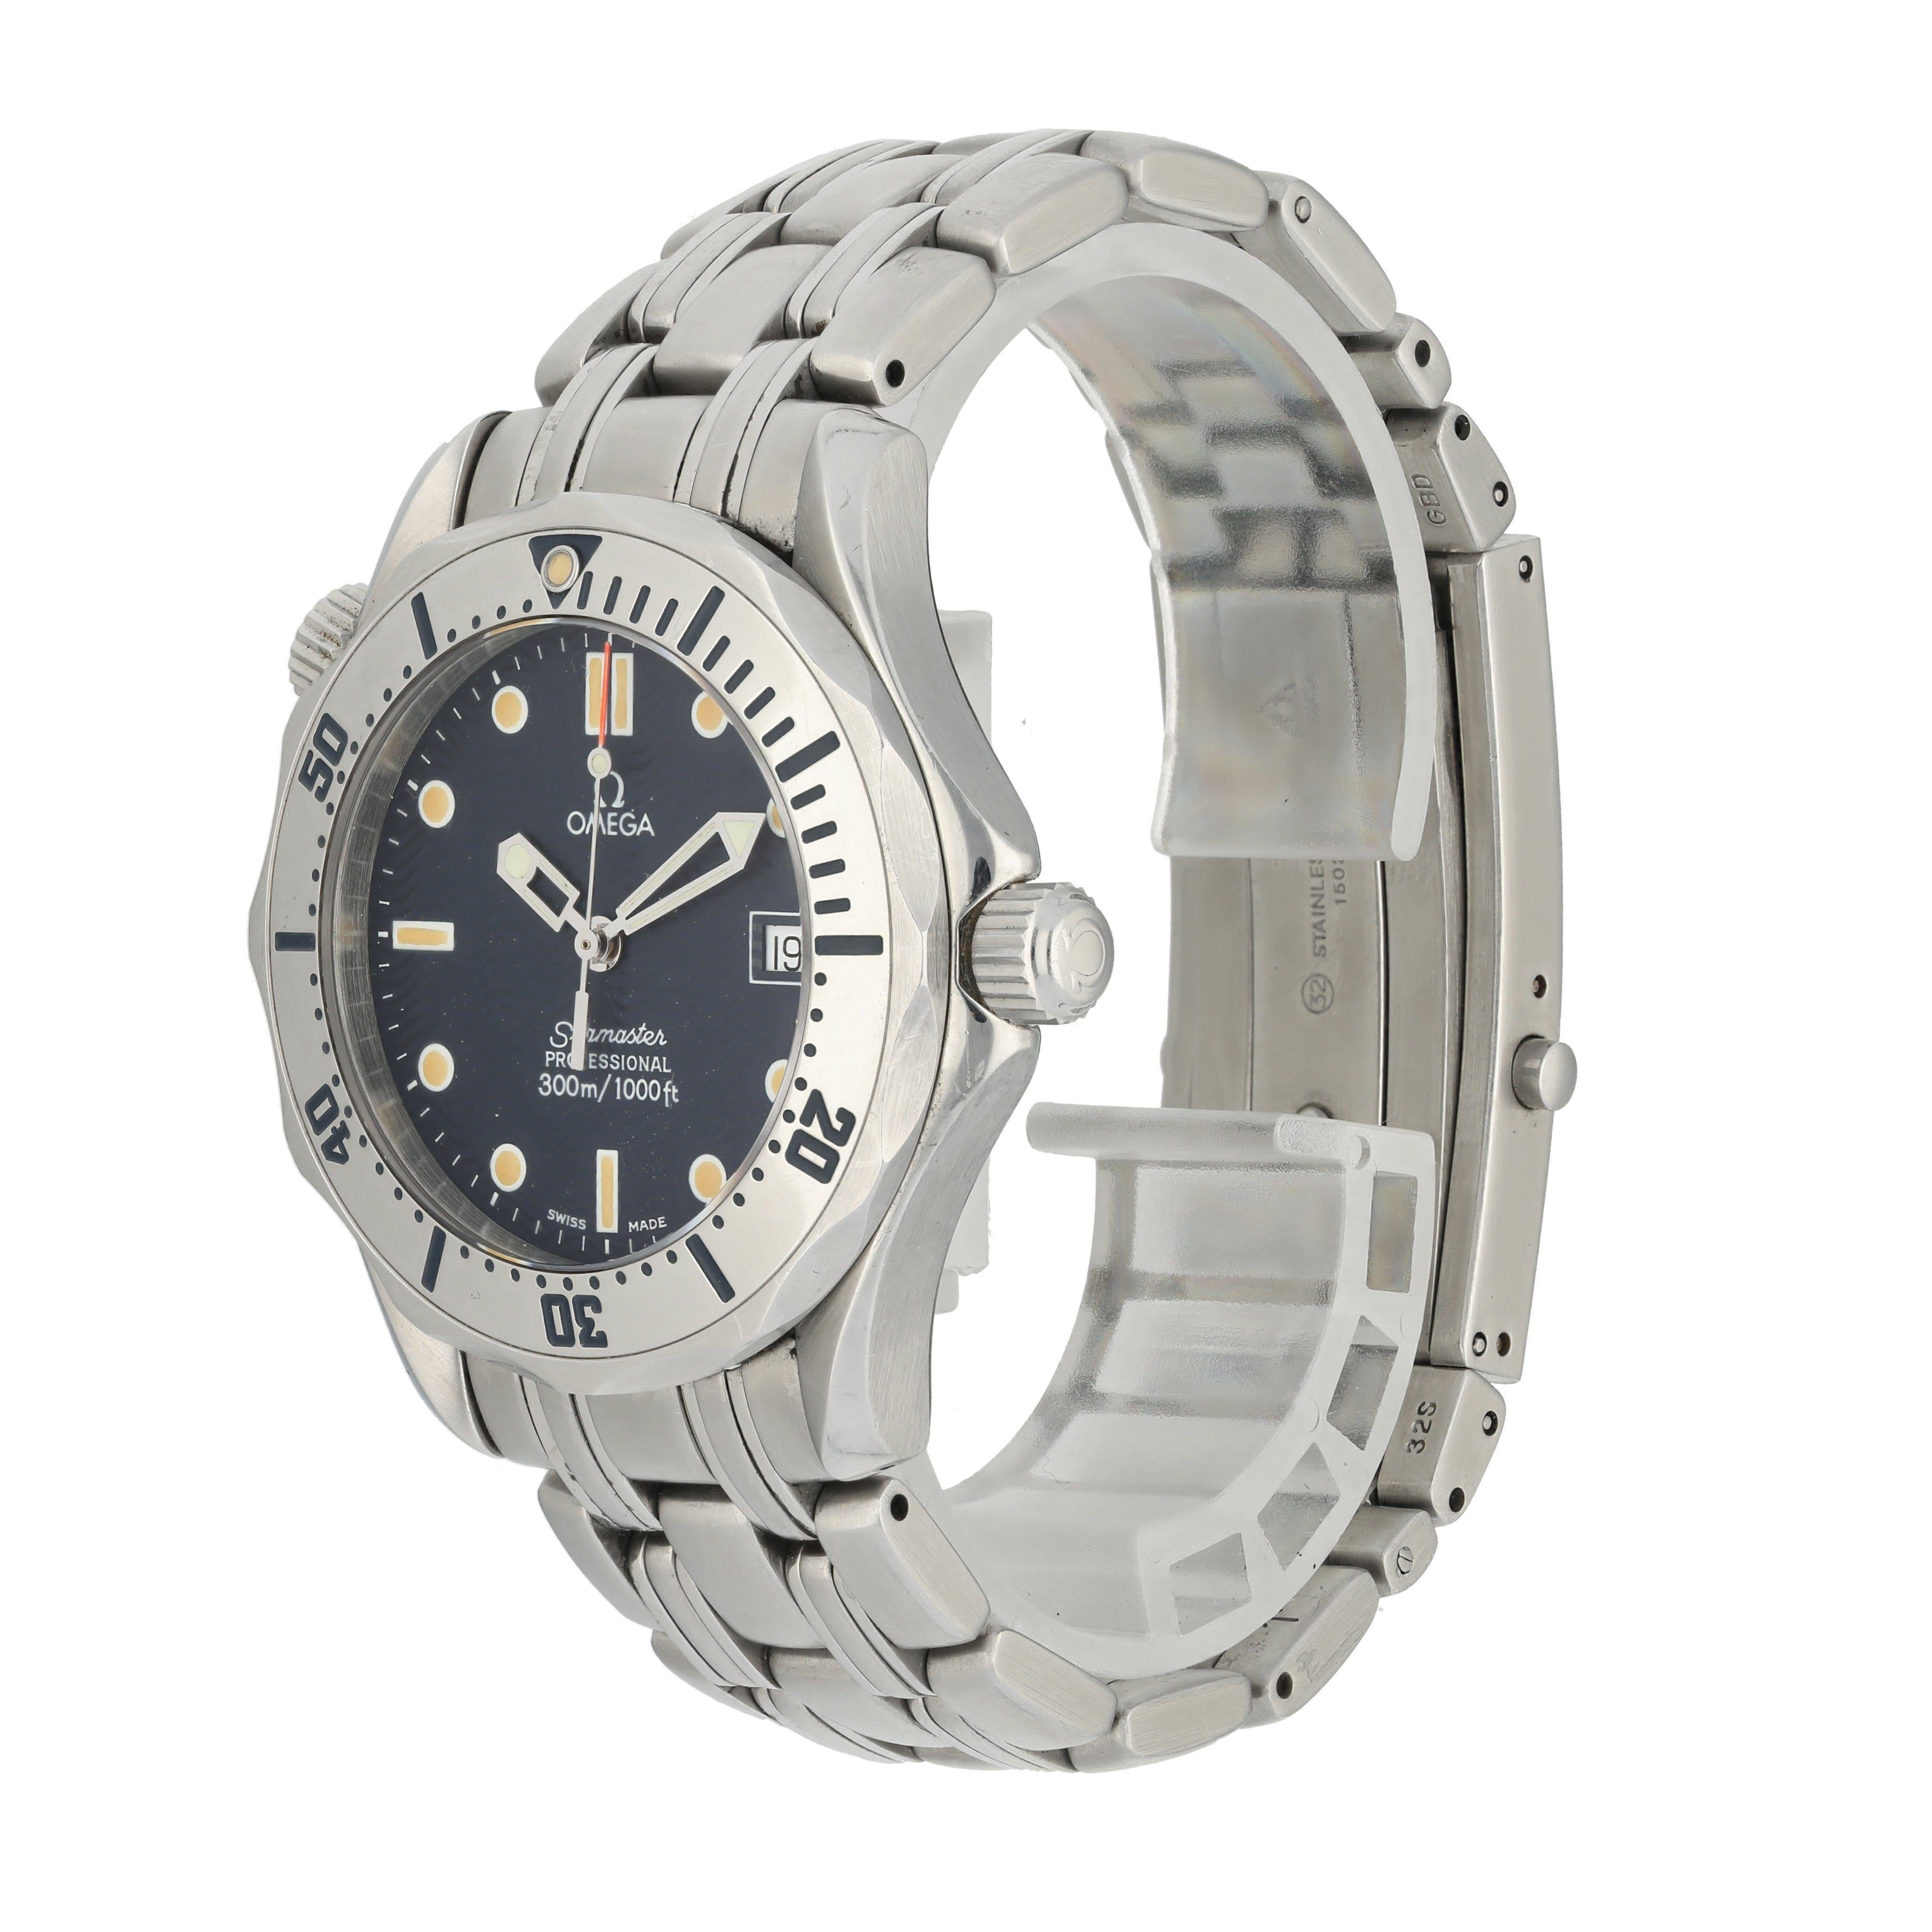 Omega Seamaster Professional 2562.80.00 Men Watch. 
38mm Stainless Steel case. 
Stainless Steel Unidirectional bezel. 
Blue dial with Luminous Steel hands and luminous dot hour markers. 
Minute markers on the outer dial. 
Date display at the 3